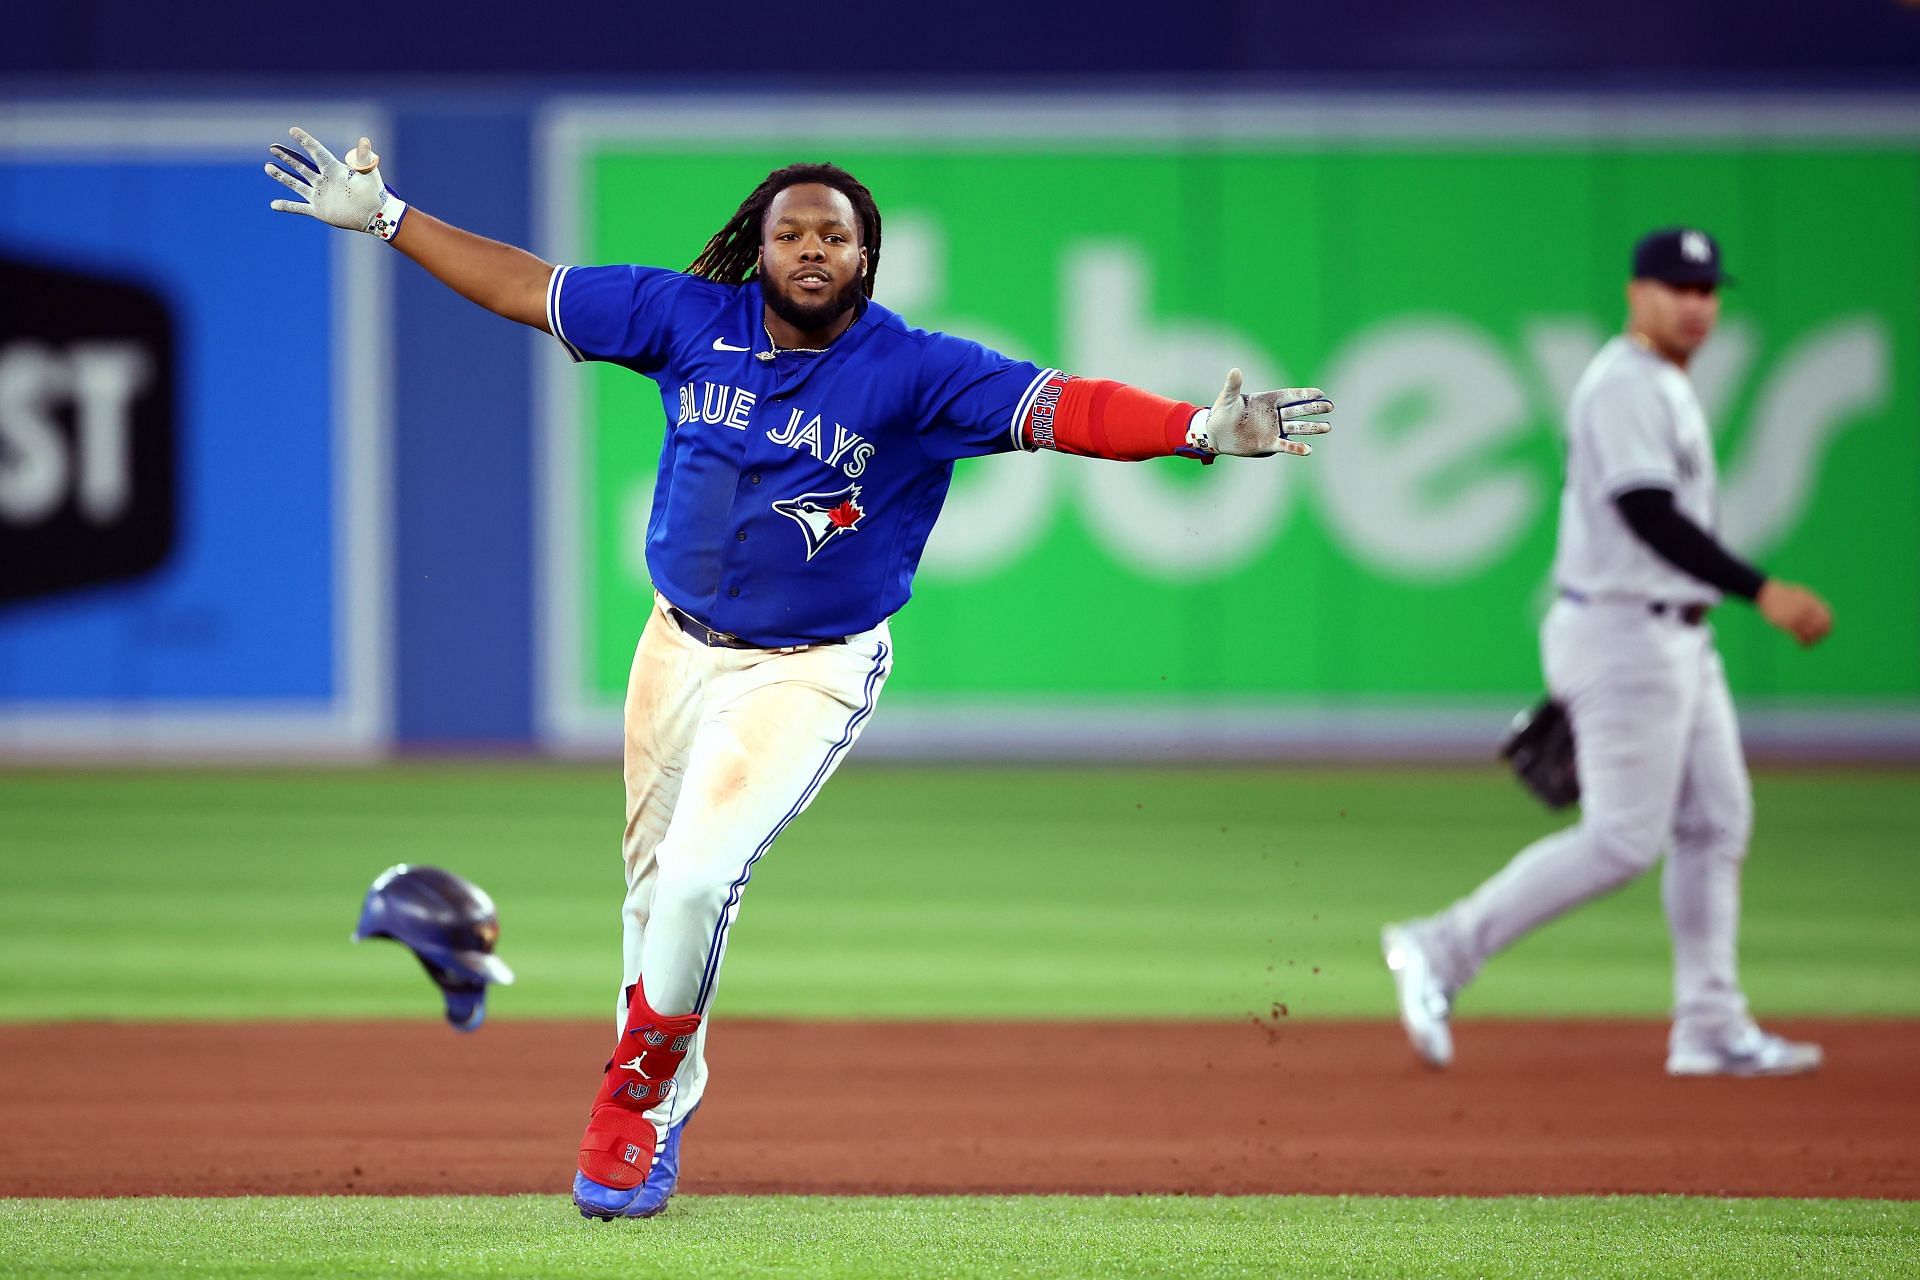 Red-hot Blue Jays enjoying gifts of prosperity in playoff drive